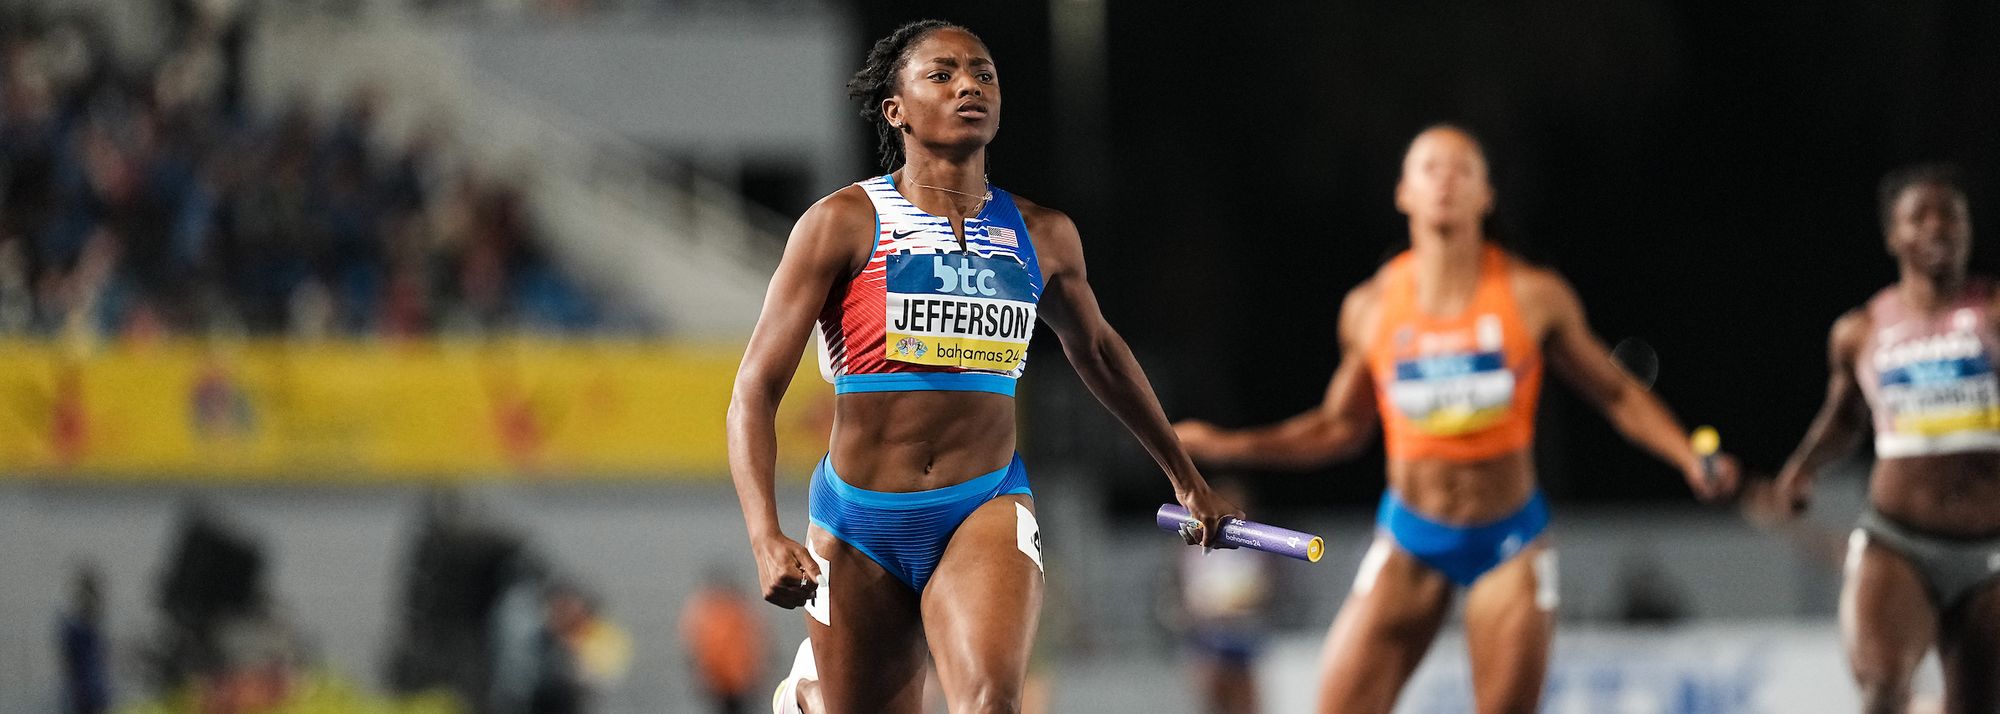 USA broke their own 10-year-old championship record to dominate the women’s 4x100m at the World Athletics Relays Bahamas 24